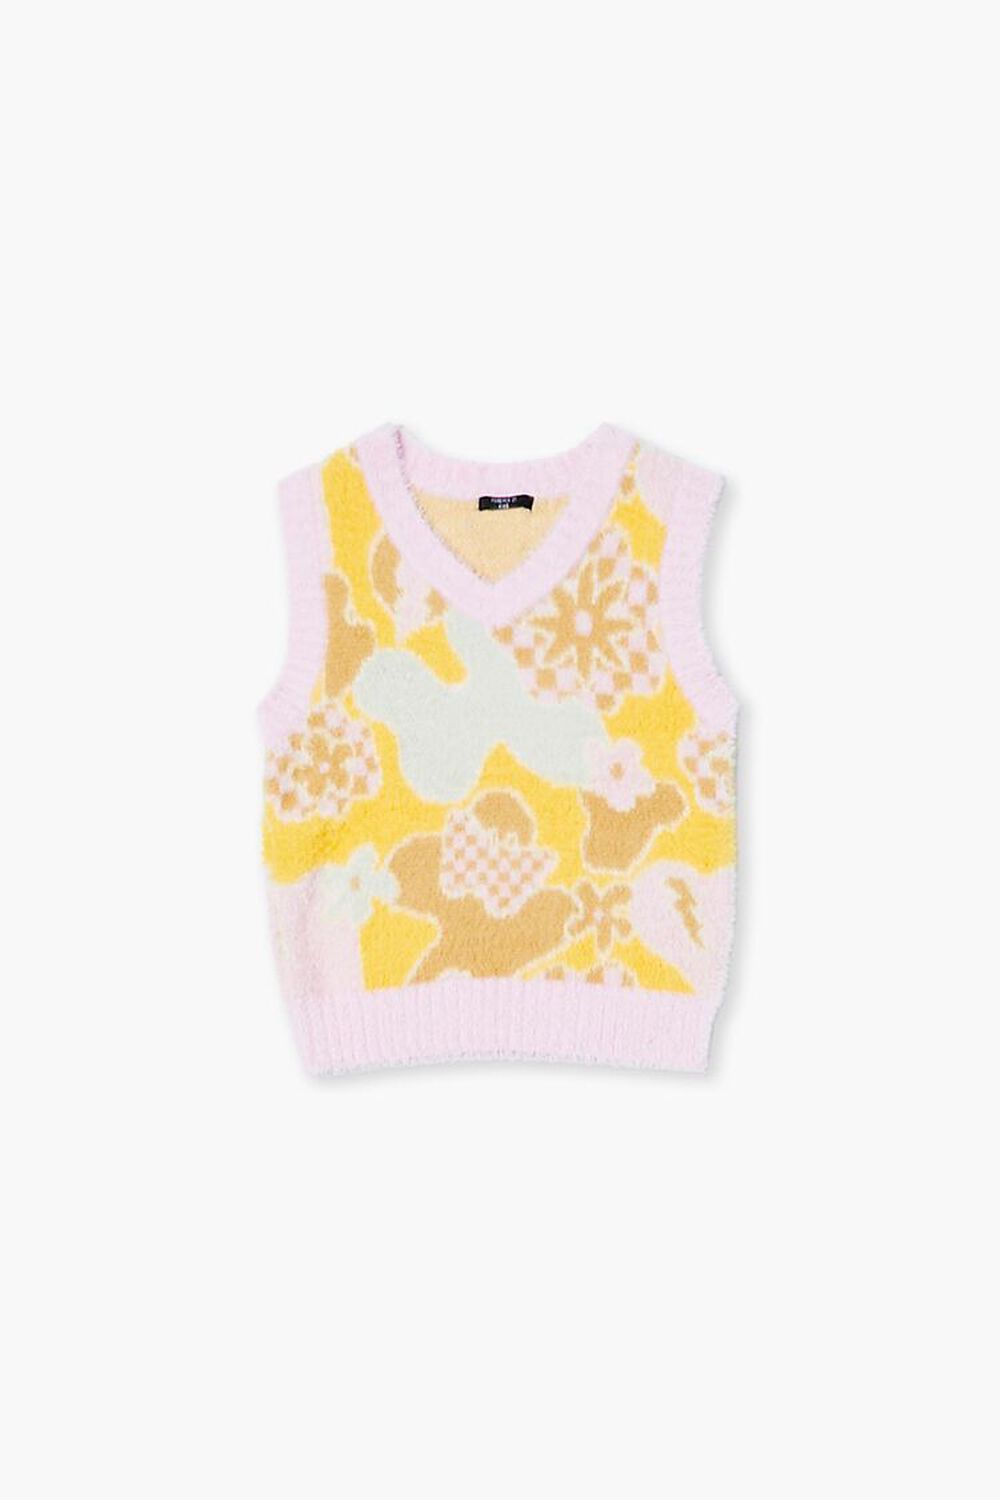 BUBBLE GUM/MULTI Girls Fuzzy Abstract Floral Sweater Vest (Kids), image 1